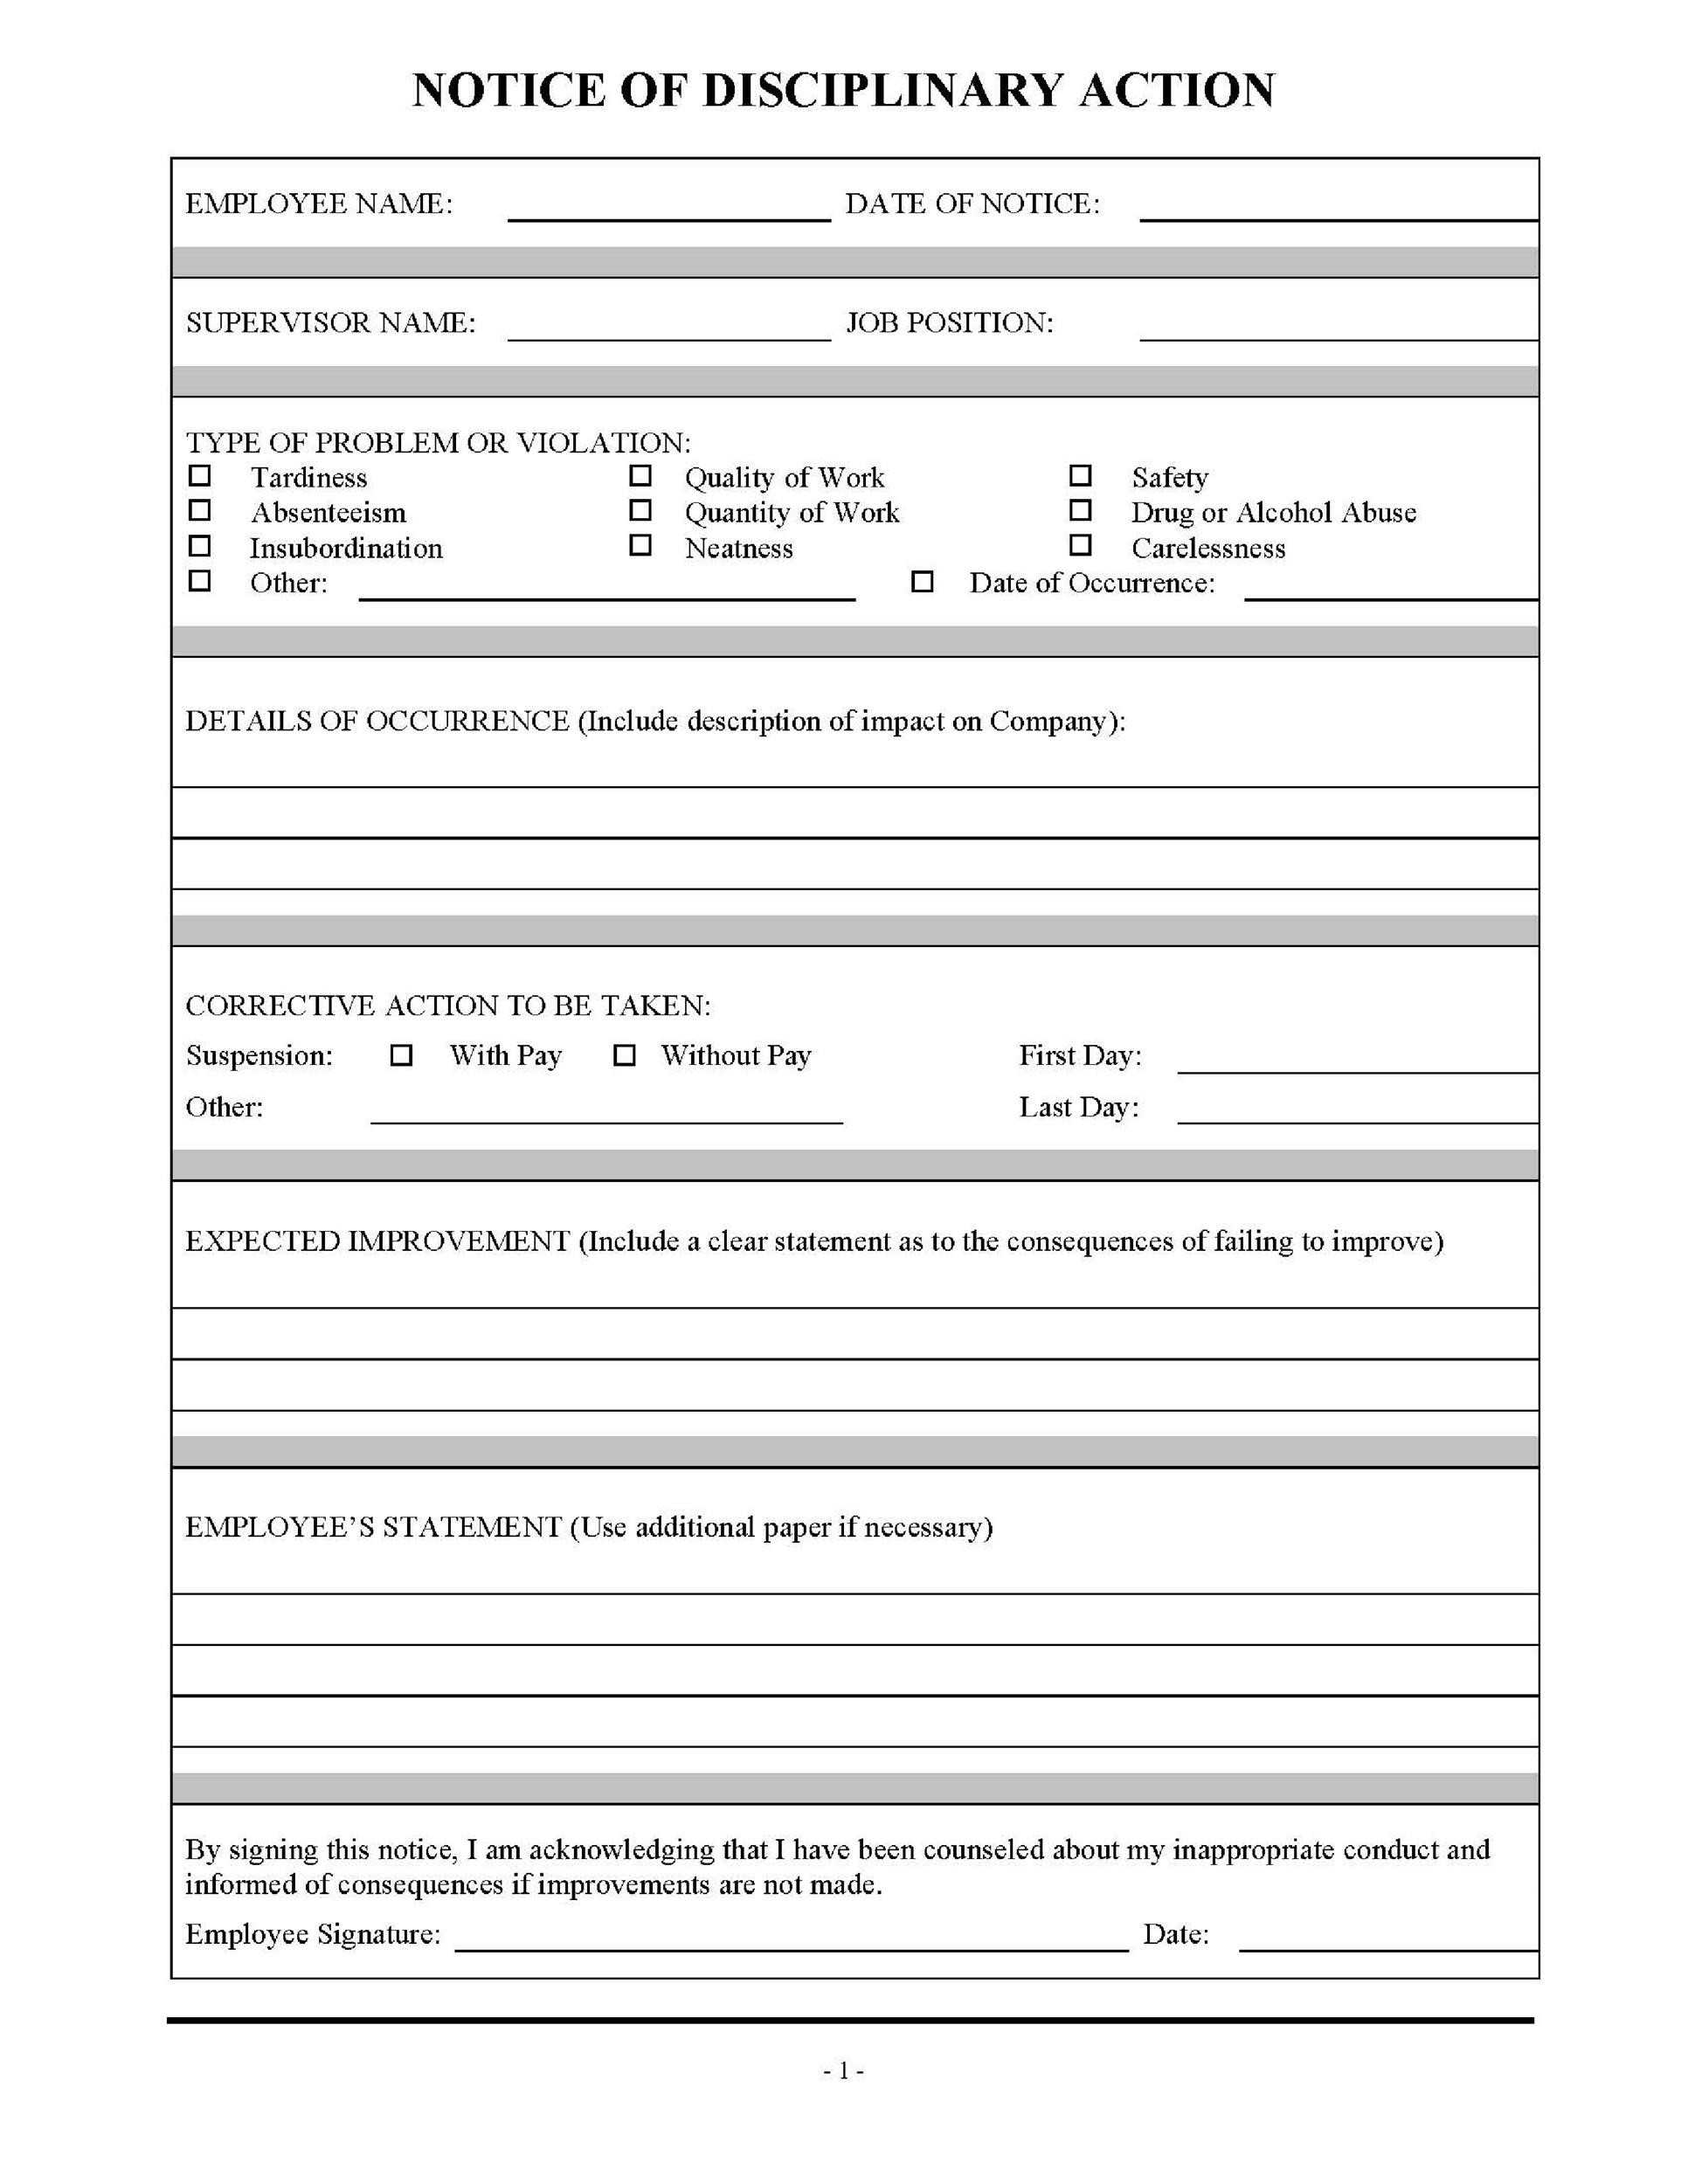 46 Effective Employee Write Up Forms Disciplinary Action Forms Employee write up template microsoft